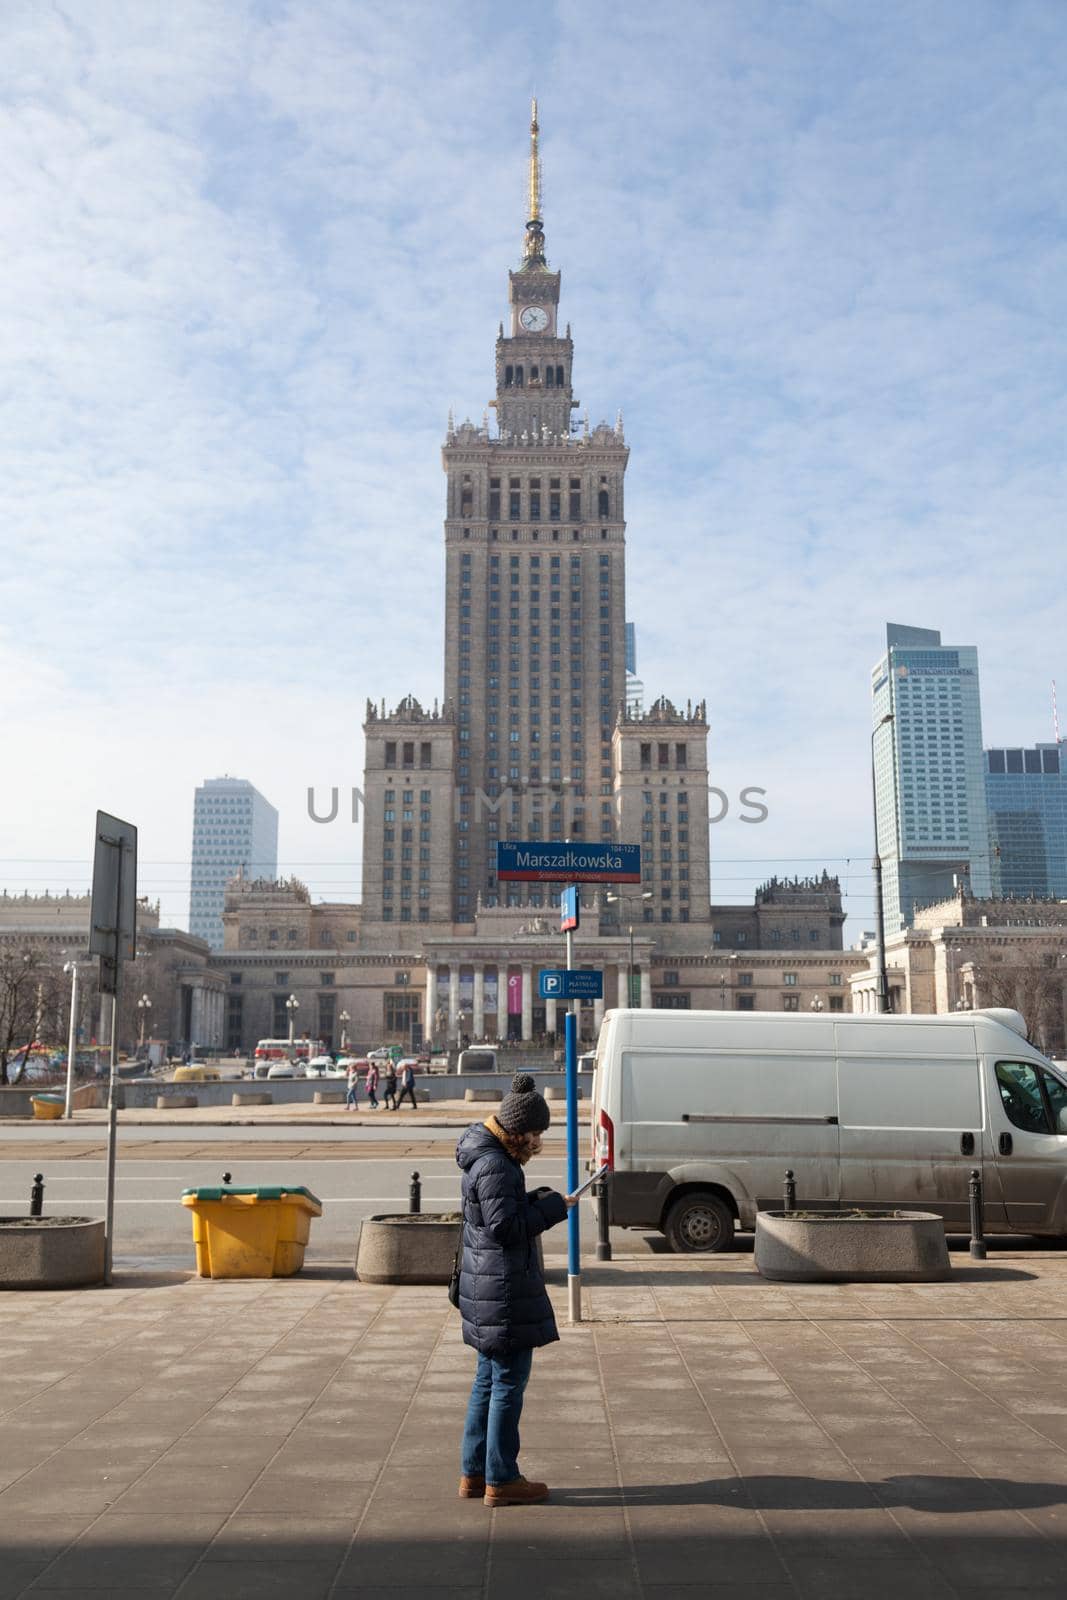 WARSAW, POLAND - March 2018 View of palace with tourist reading a map - Warsaw City Center.